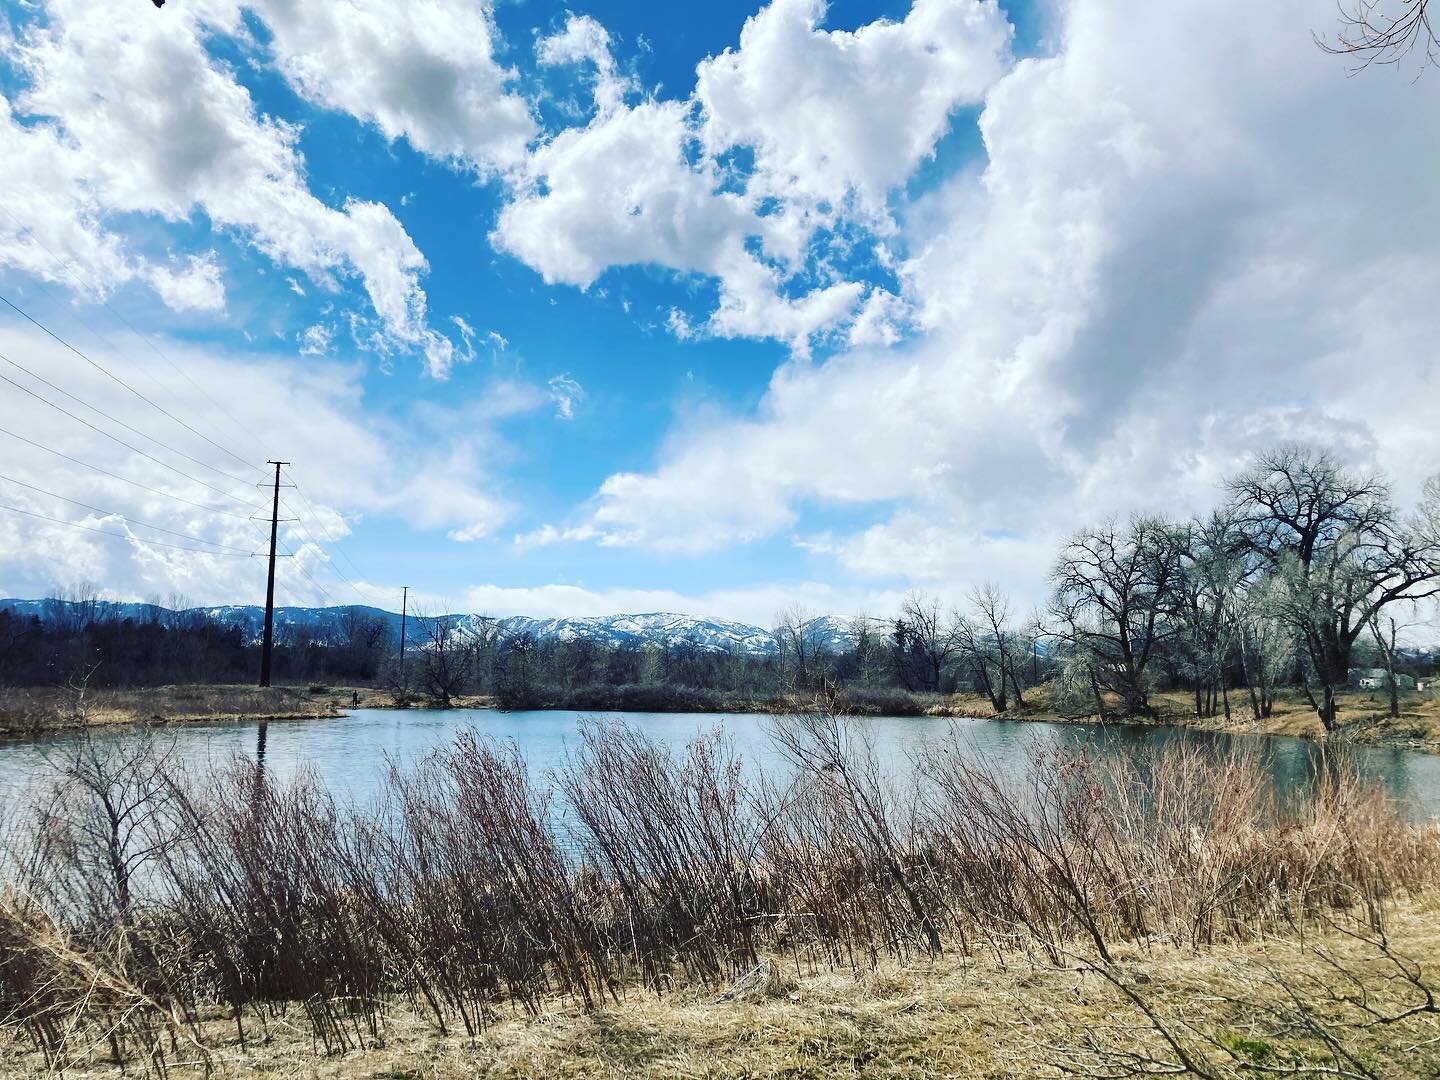 Happy #takeawalkintheparkday  from STUDIOPLAATS! We love our #fortcollinsparks 

#landscapearchitecture #cloudyday #park #walk #fortcollins #foco #colorado